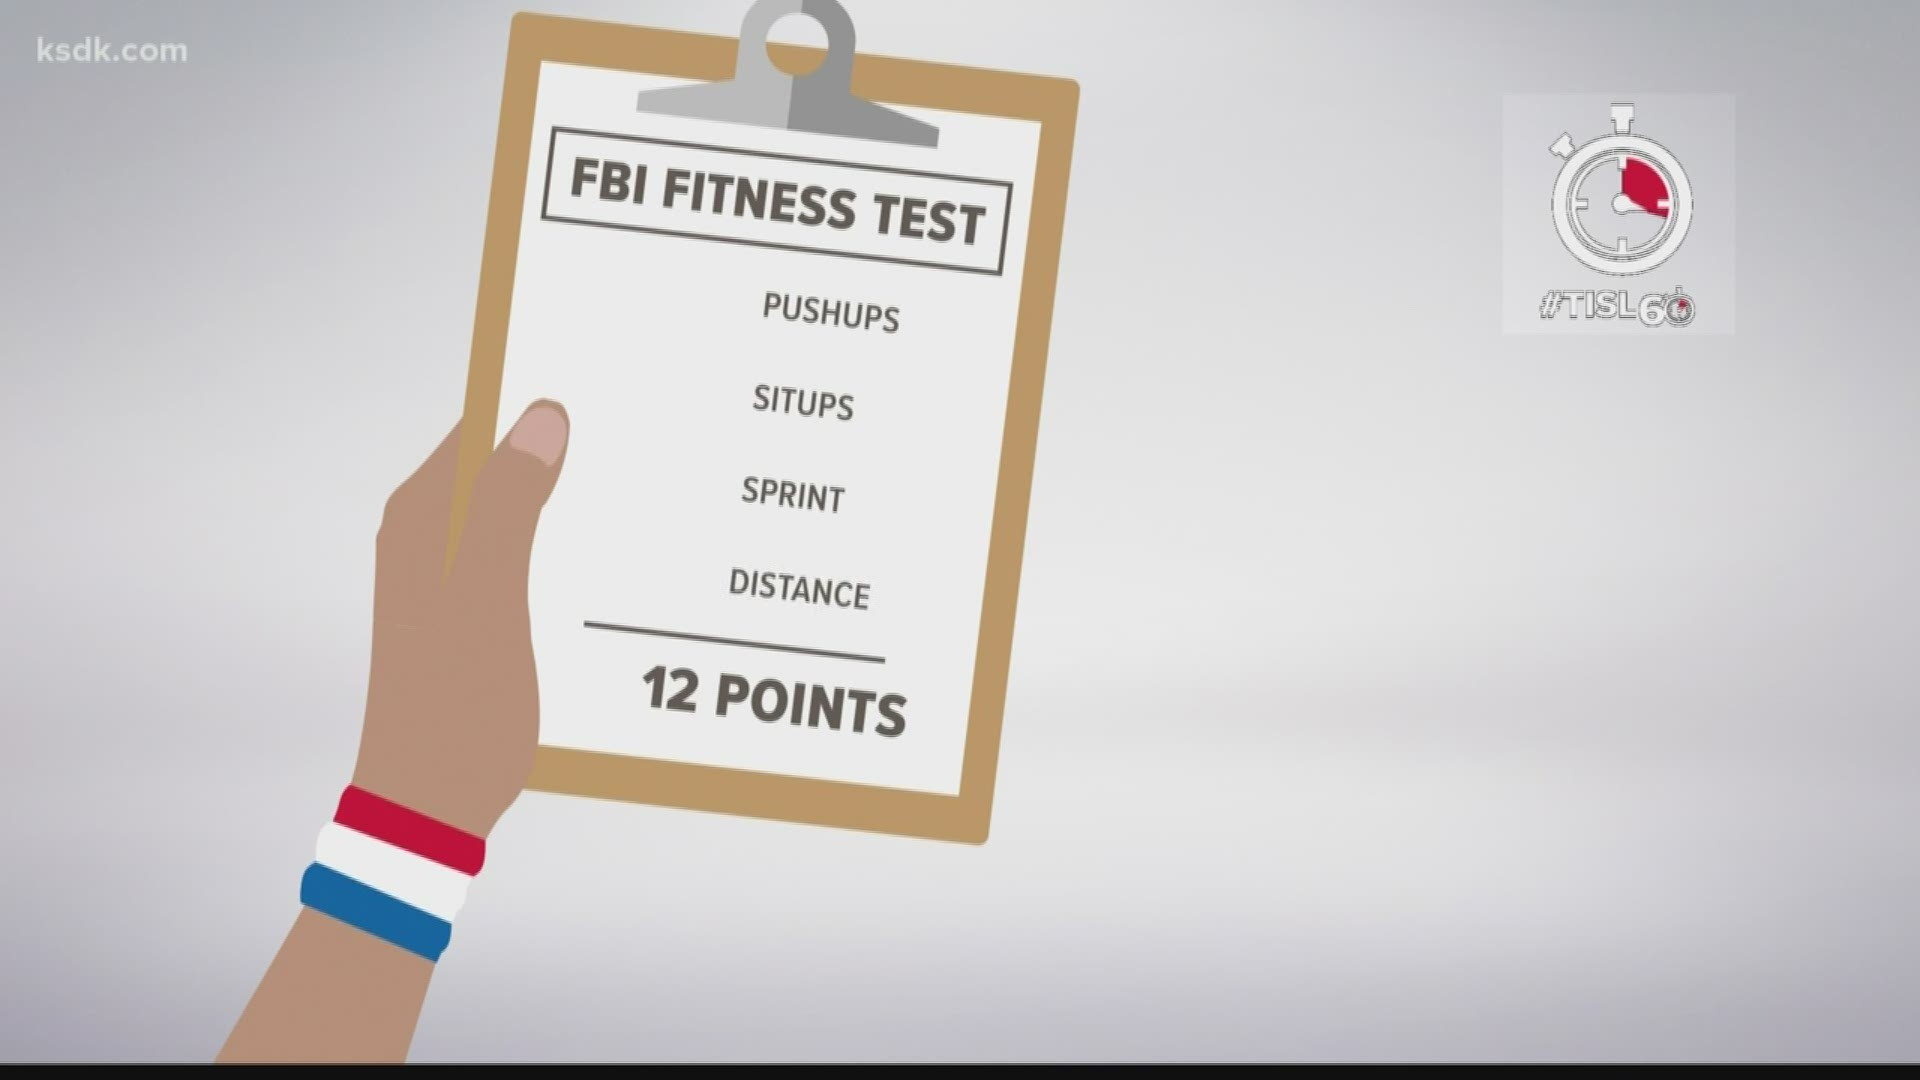 5 On Your Side's Rhyan Henson took the test. Watch to see if he passed or failed!